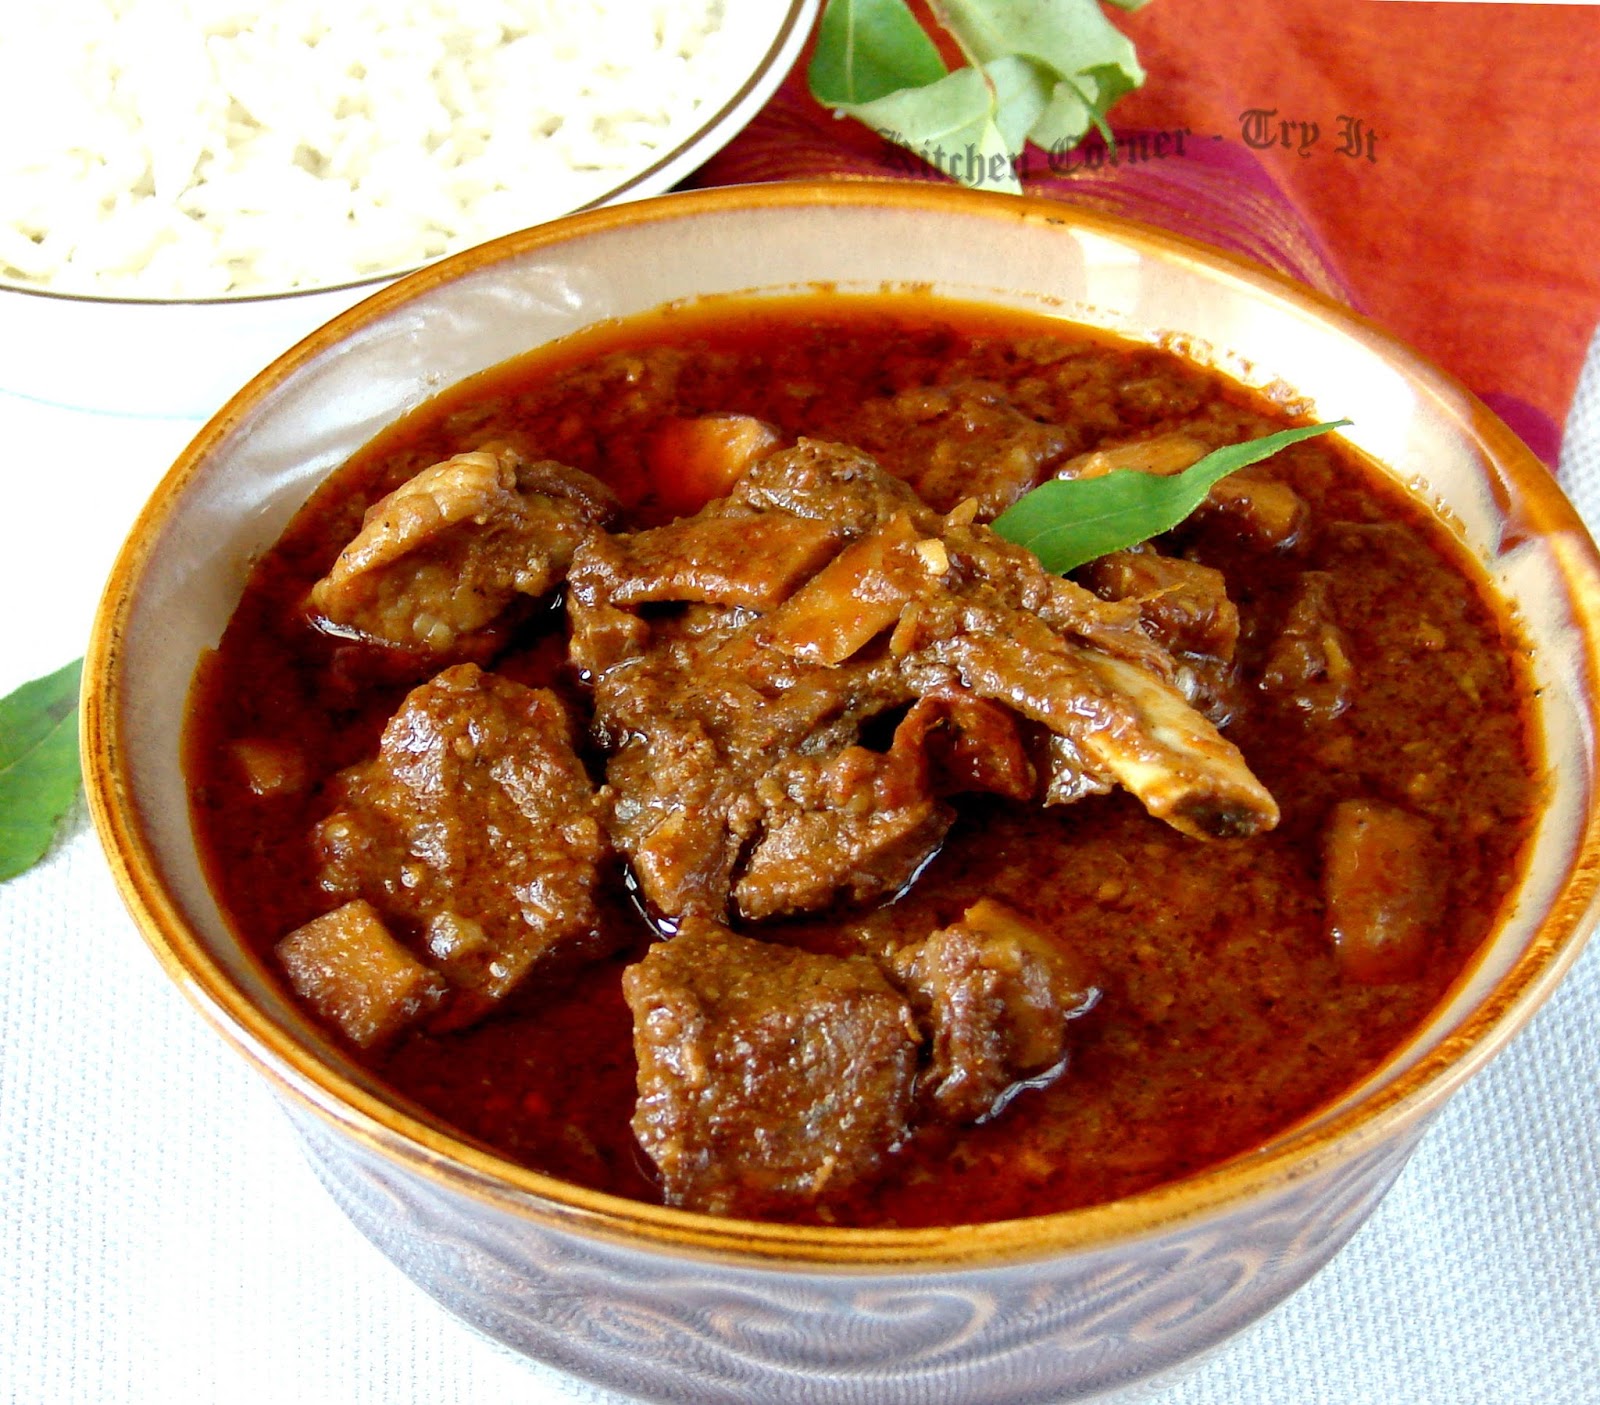 Non Veg meals - (Rice with Mutton Gravy, with egg)